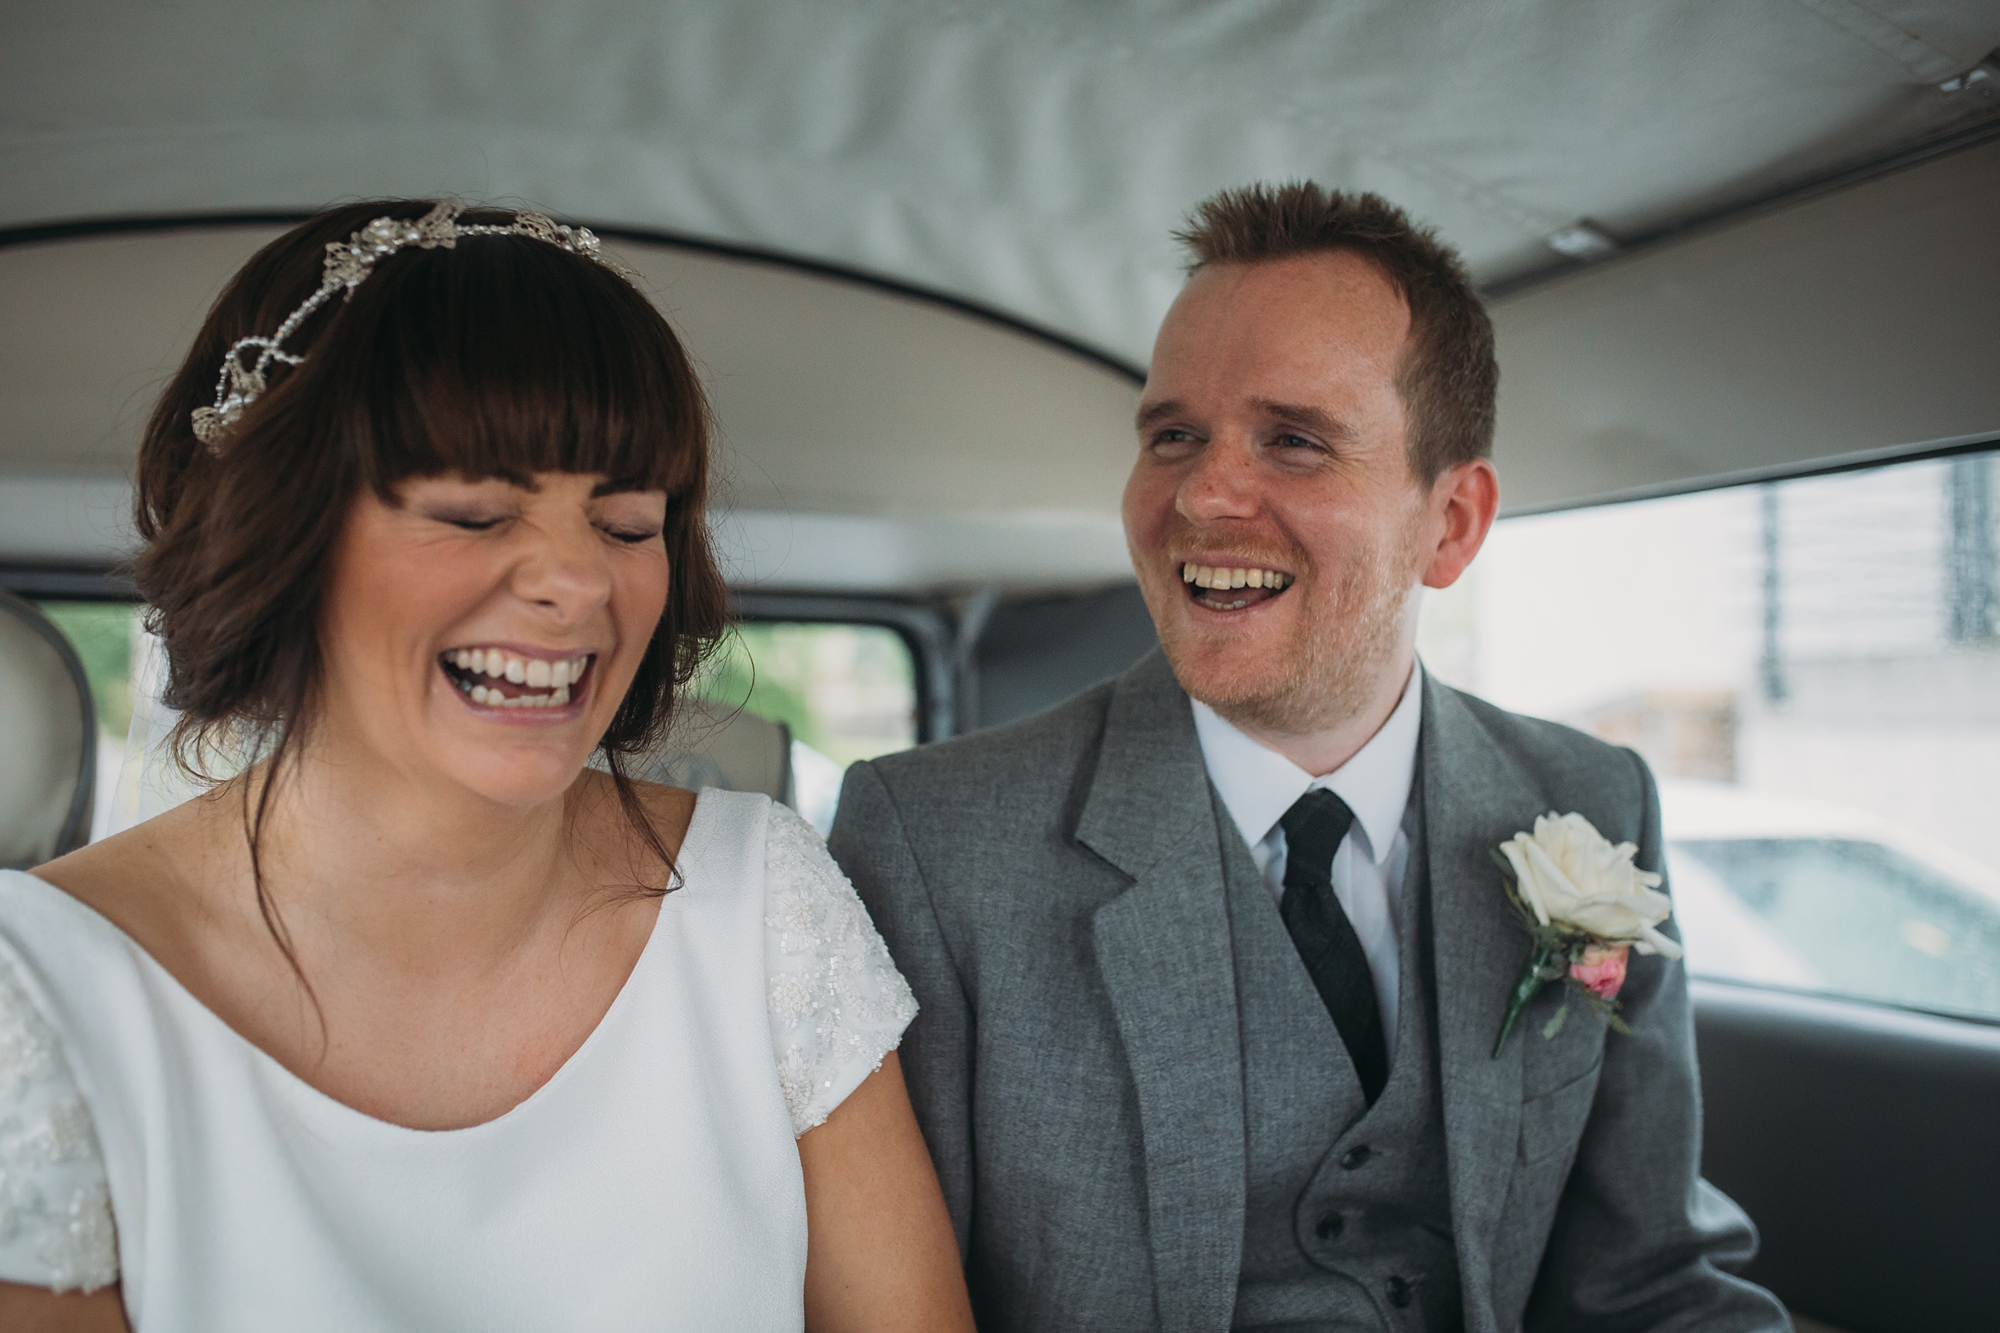 best wedding photographs of a coupe laughing at 3 sisters bake